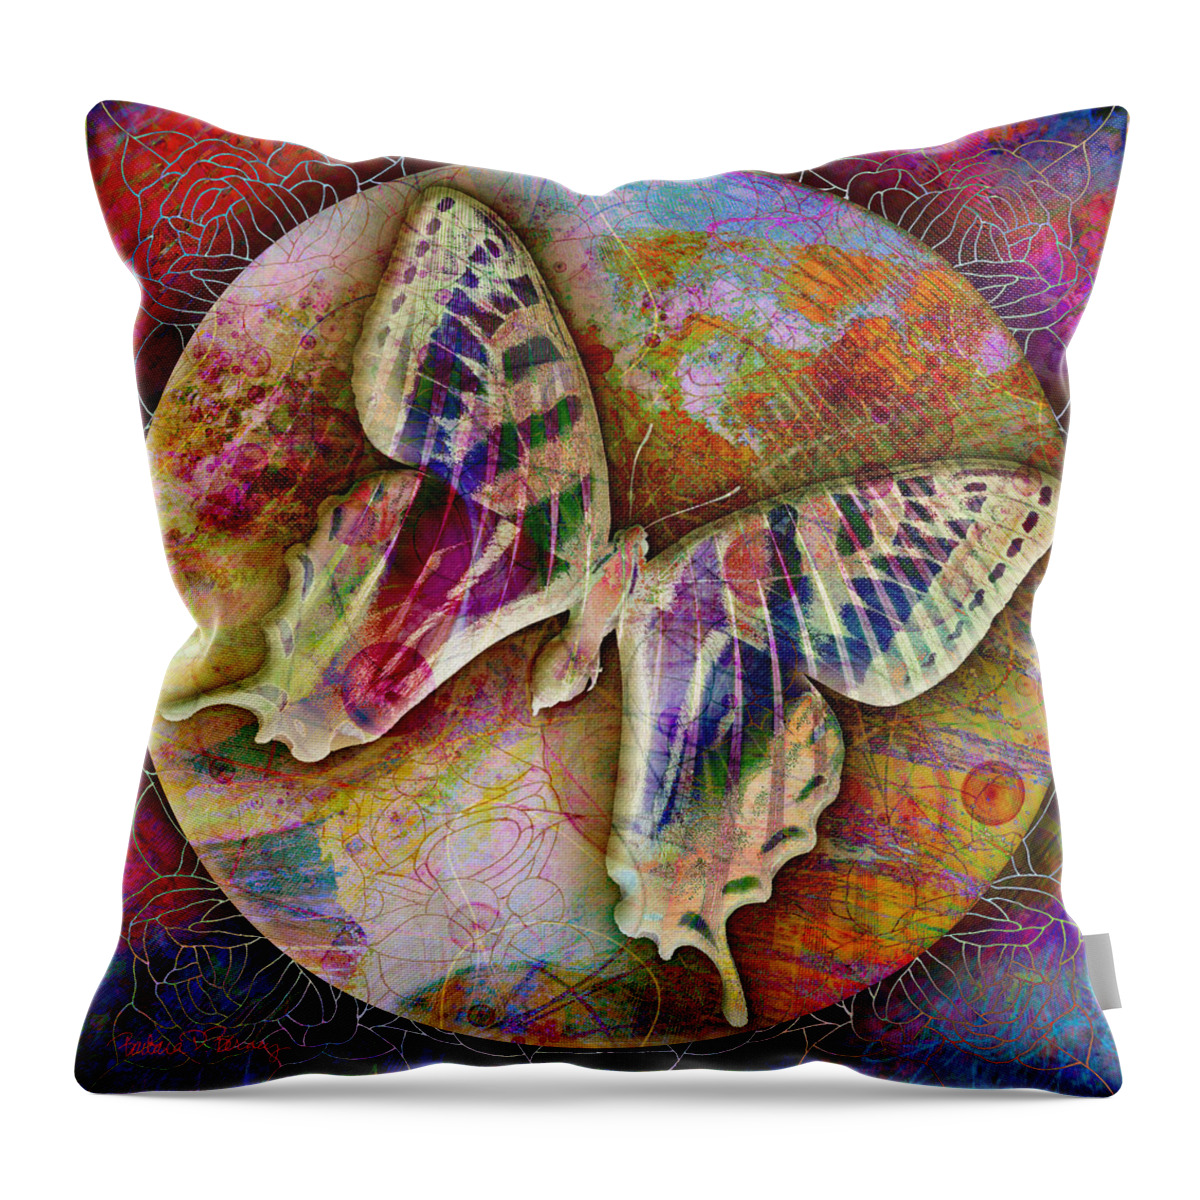 Butterfly Throw Pillow featuring the digital art Butterfly by Barbara Berney